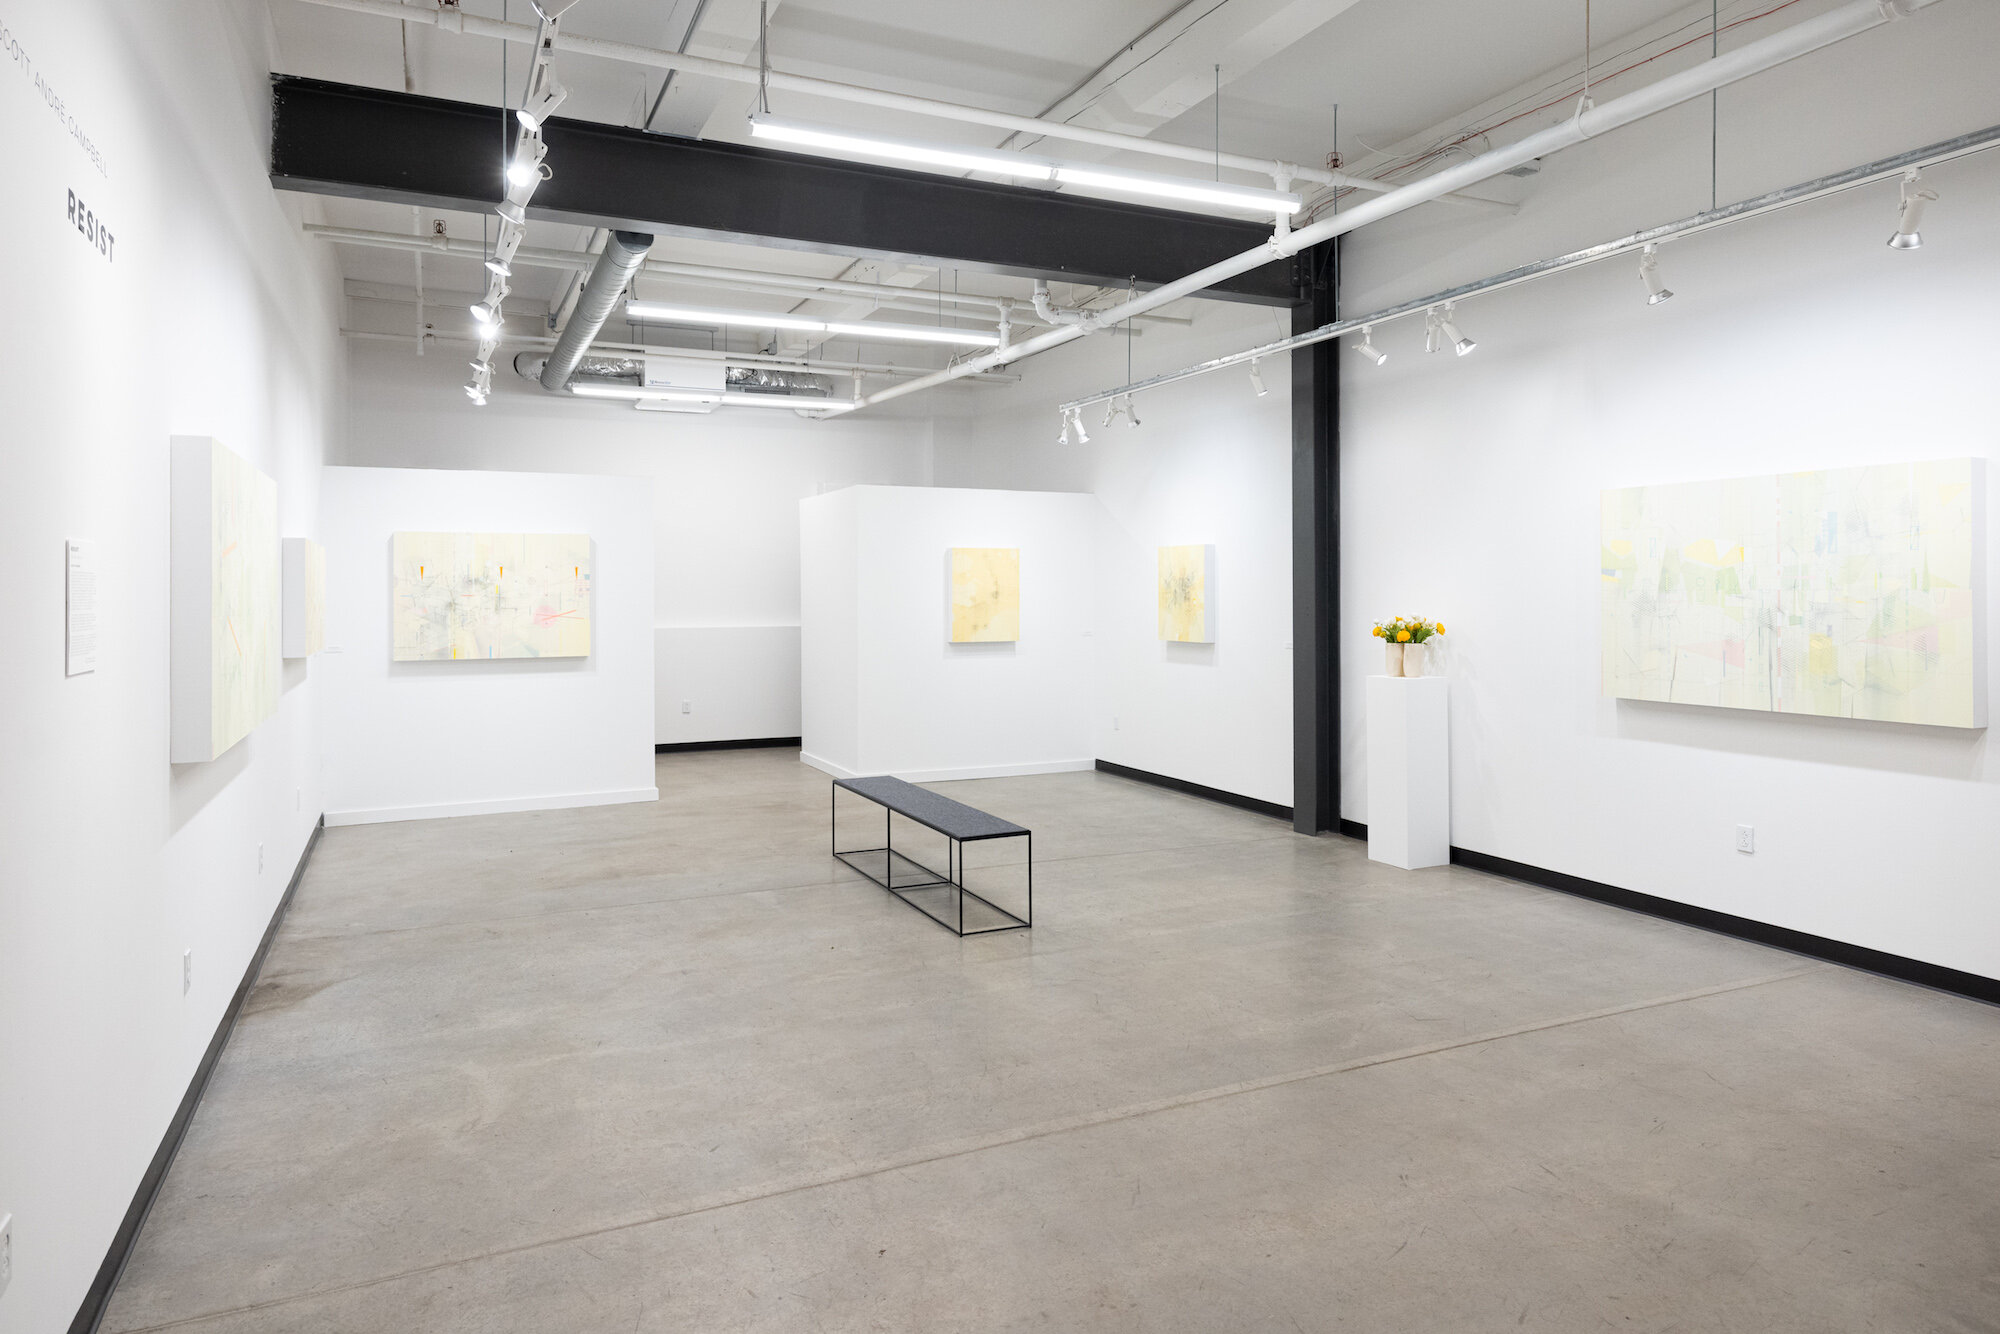 Installation View of "Resist" @ Soapbox Arts Gallery